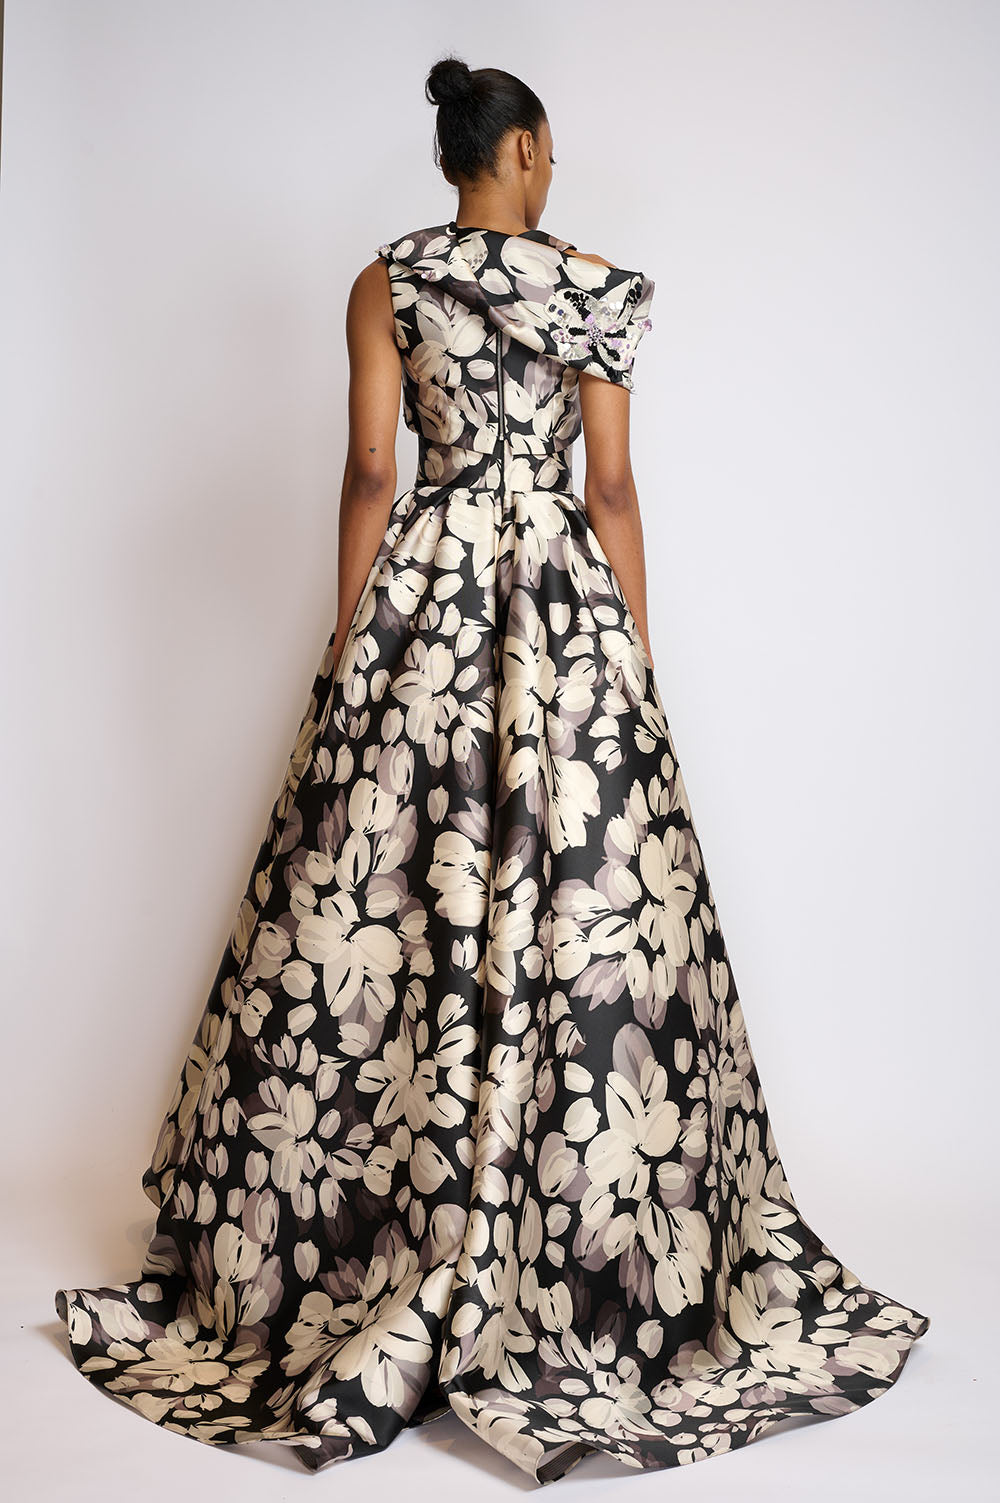 THE COLLECTION WITH THE FLORAL BALL GOWN — MISS PRINTS